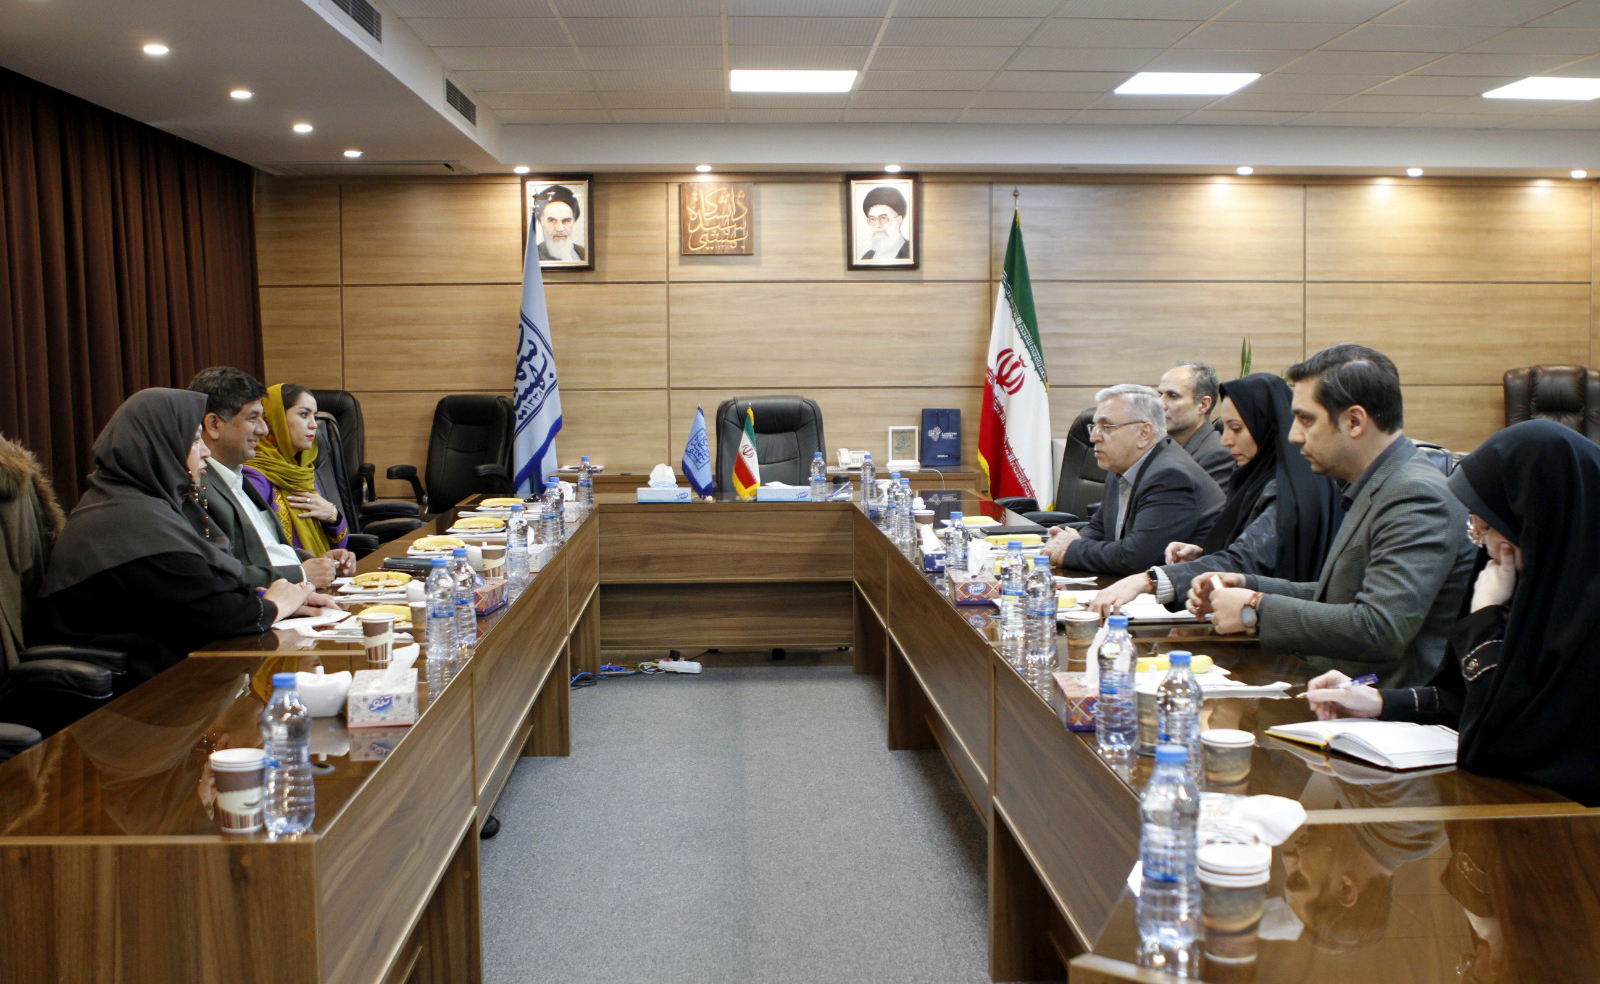 The meeting of the President of ECI with the Chancellor of Shahid Beheshti University